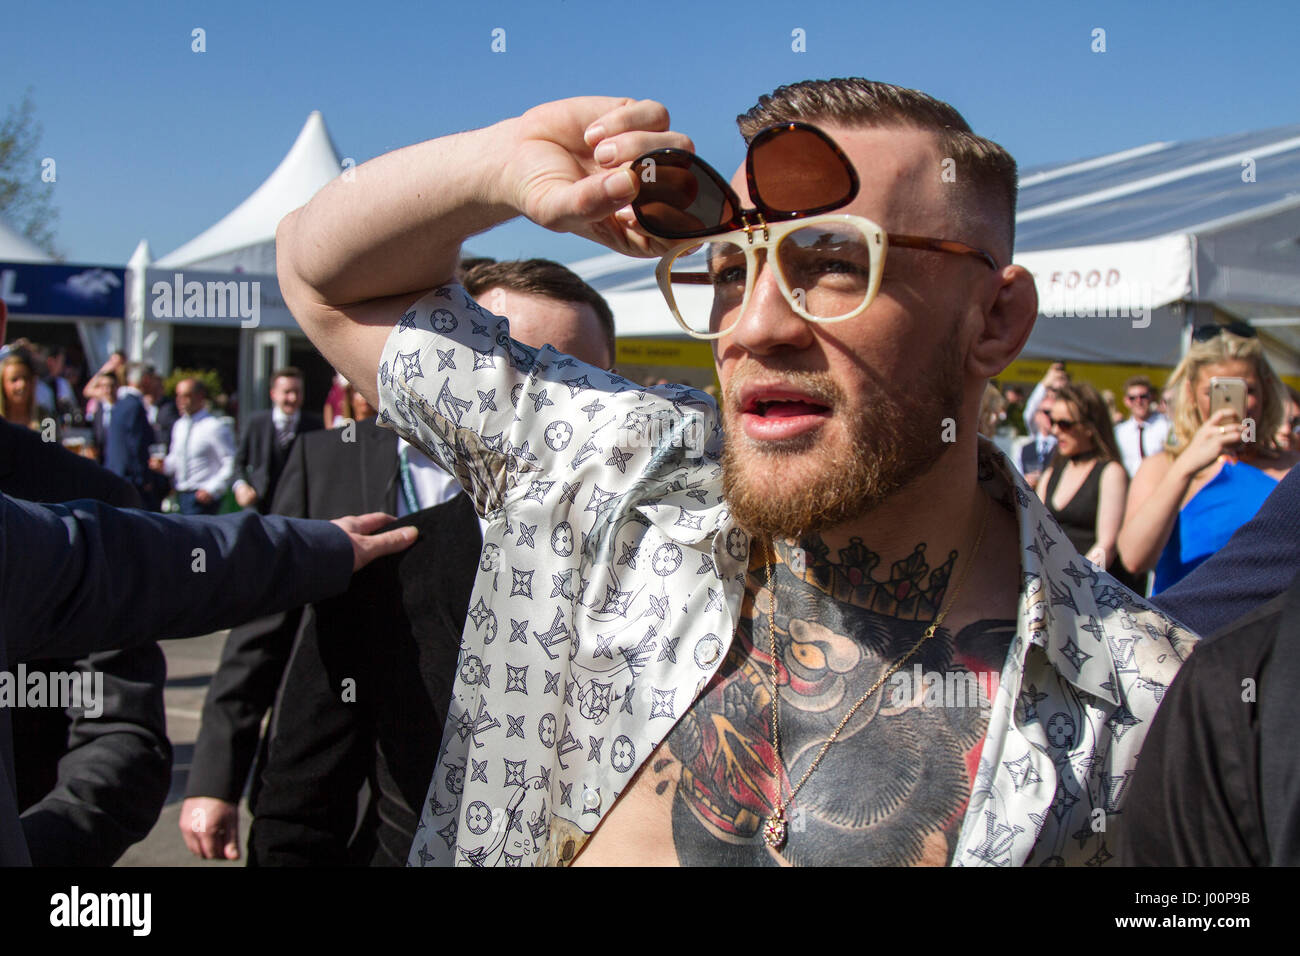 Randox Health Grand National, Liverpool, Merseyside. 8th April 2017. Famous  UFC MMA boxer 'Conor McGregor' attends the Grand National horse racing  event amid tight security. Known for his own fashion sense and